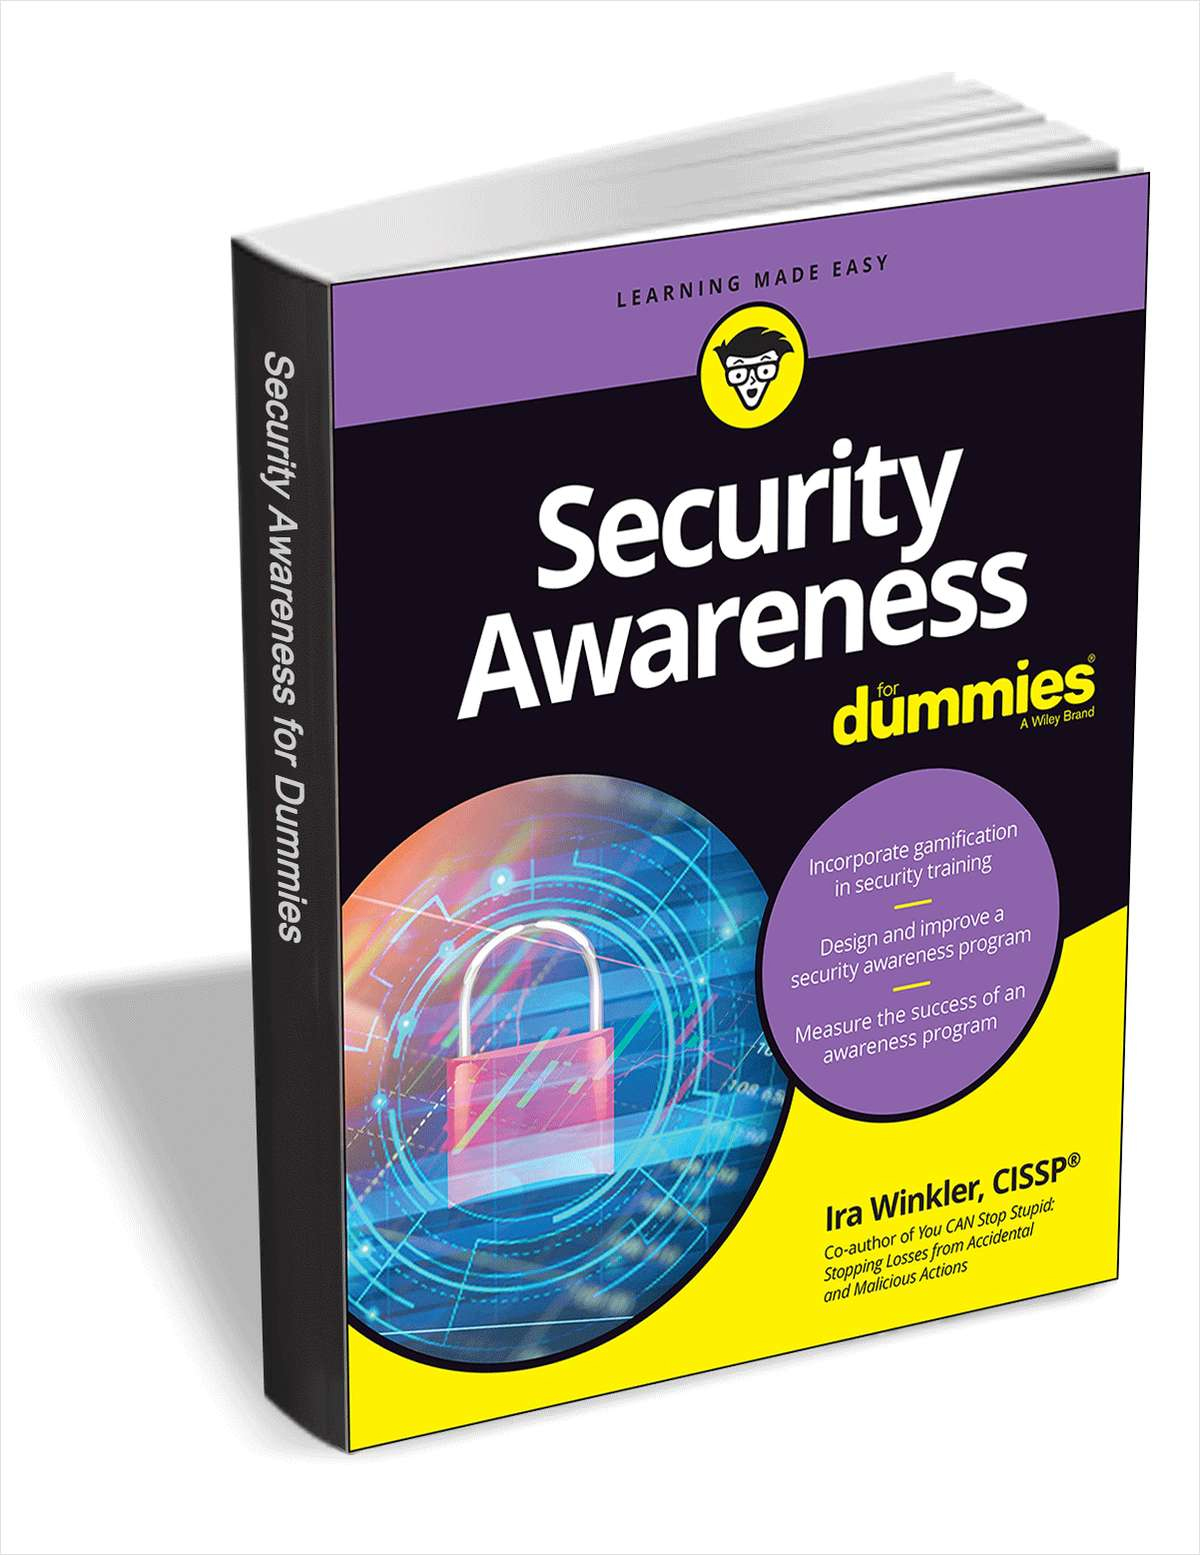 Security Awareness For Dummies ( $18.00 Value) FREE for a Limited Time Screenshot